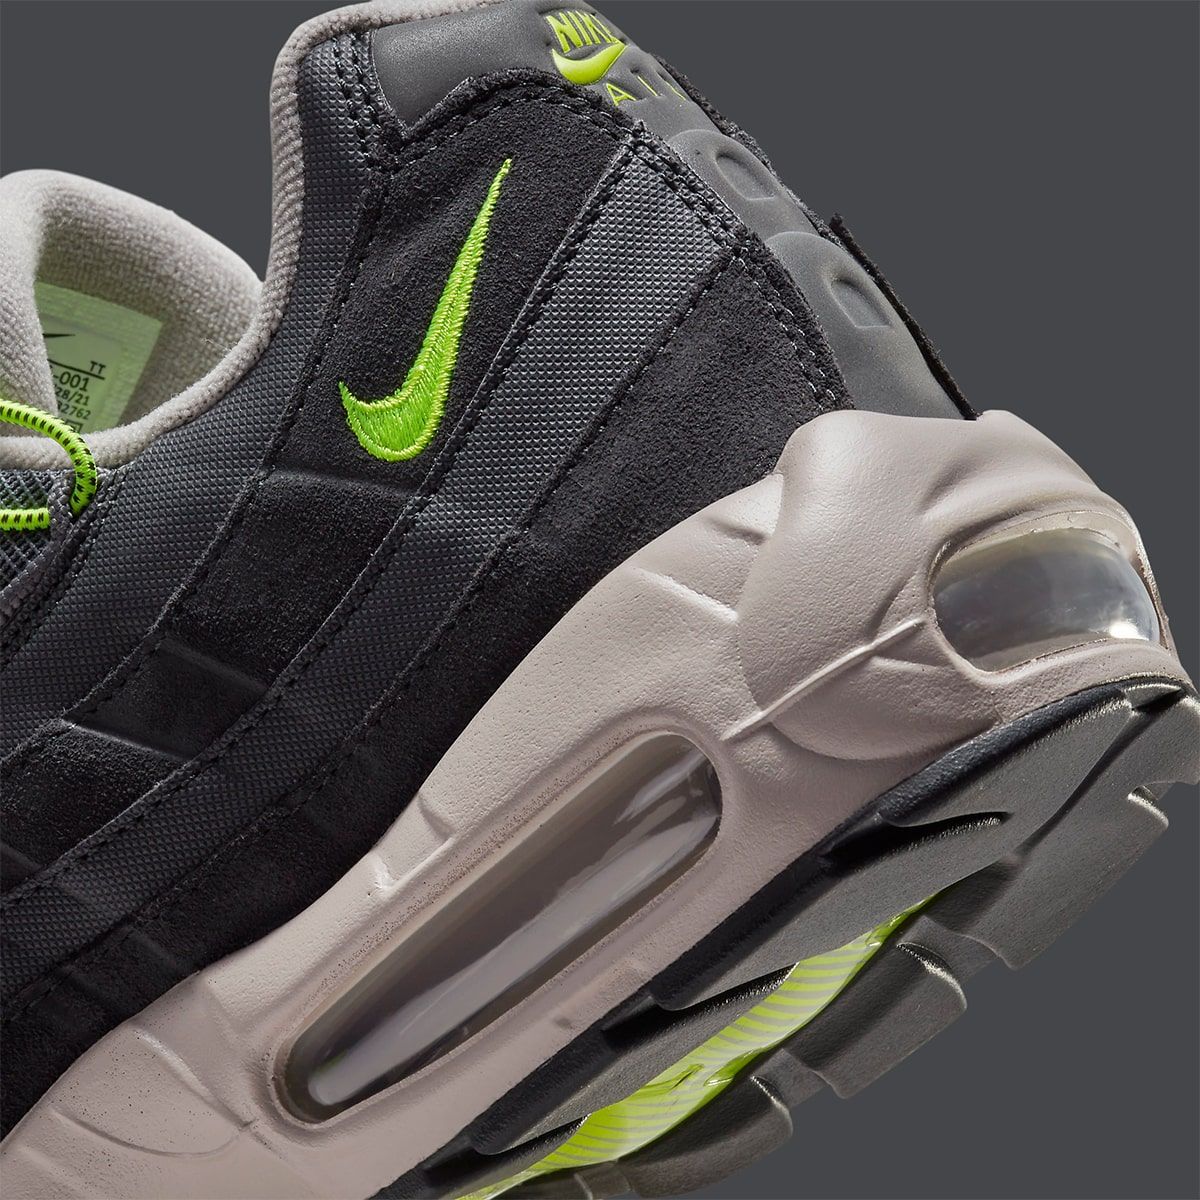 Dual-Laced Air Max 95 Appears in “Neon” | House of Heat°